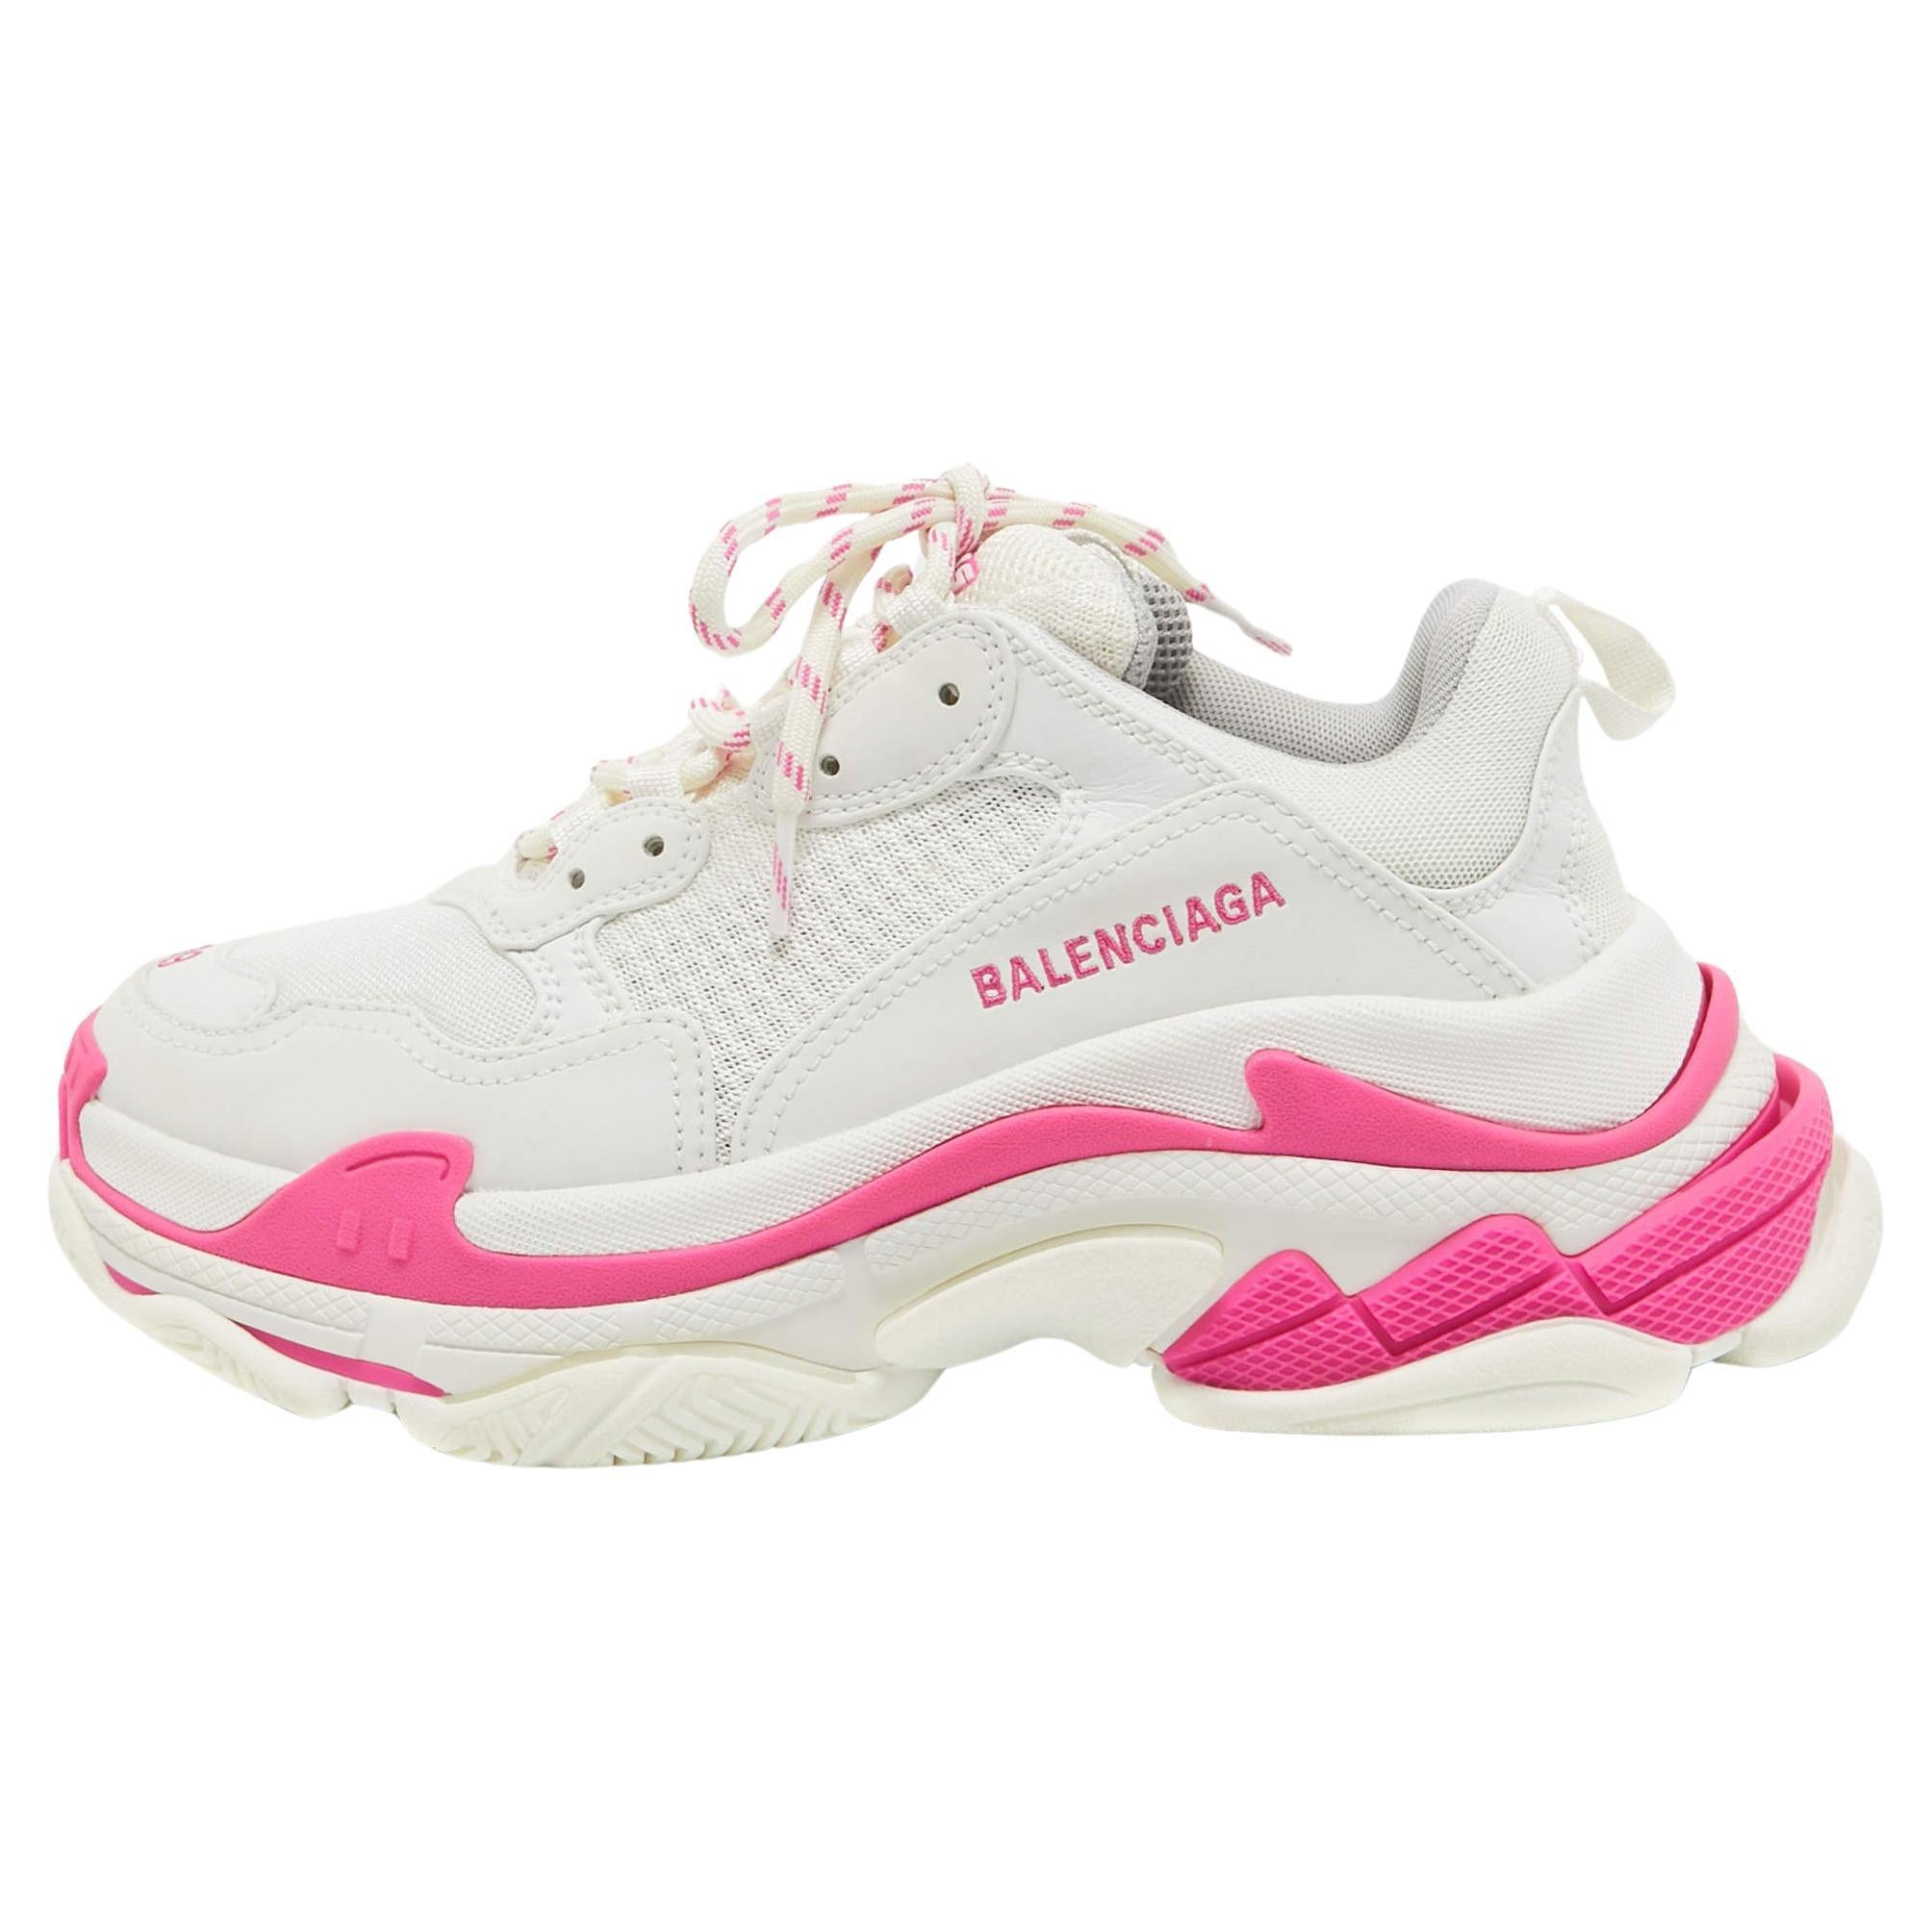 Balenciaga White/Pink Leather and Mesh Triple S Sneakers Size 39